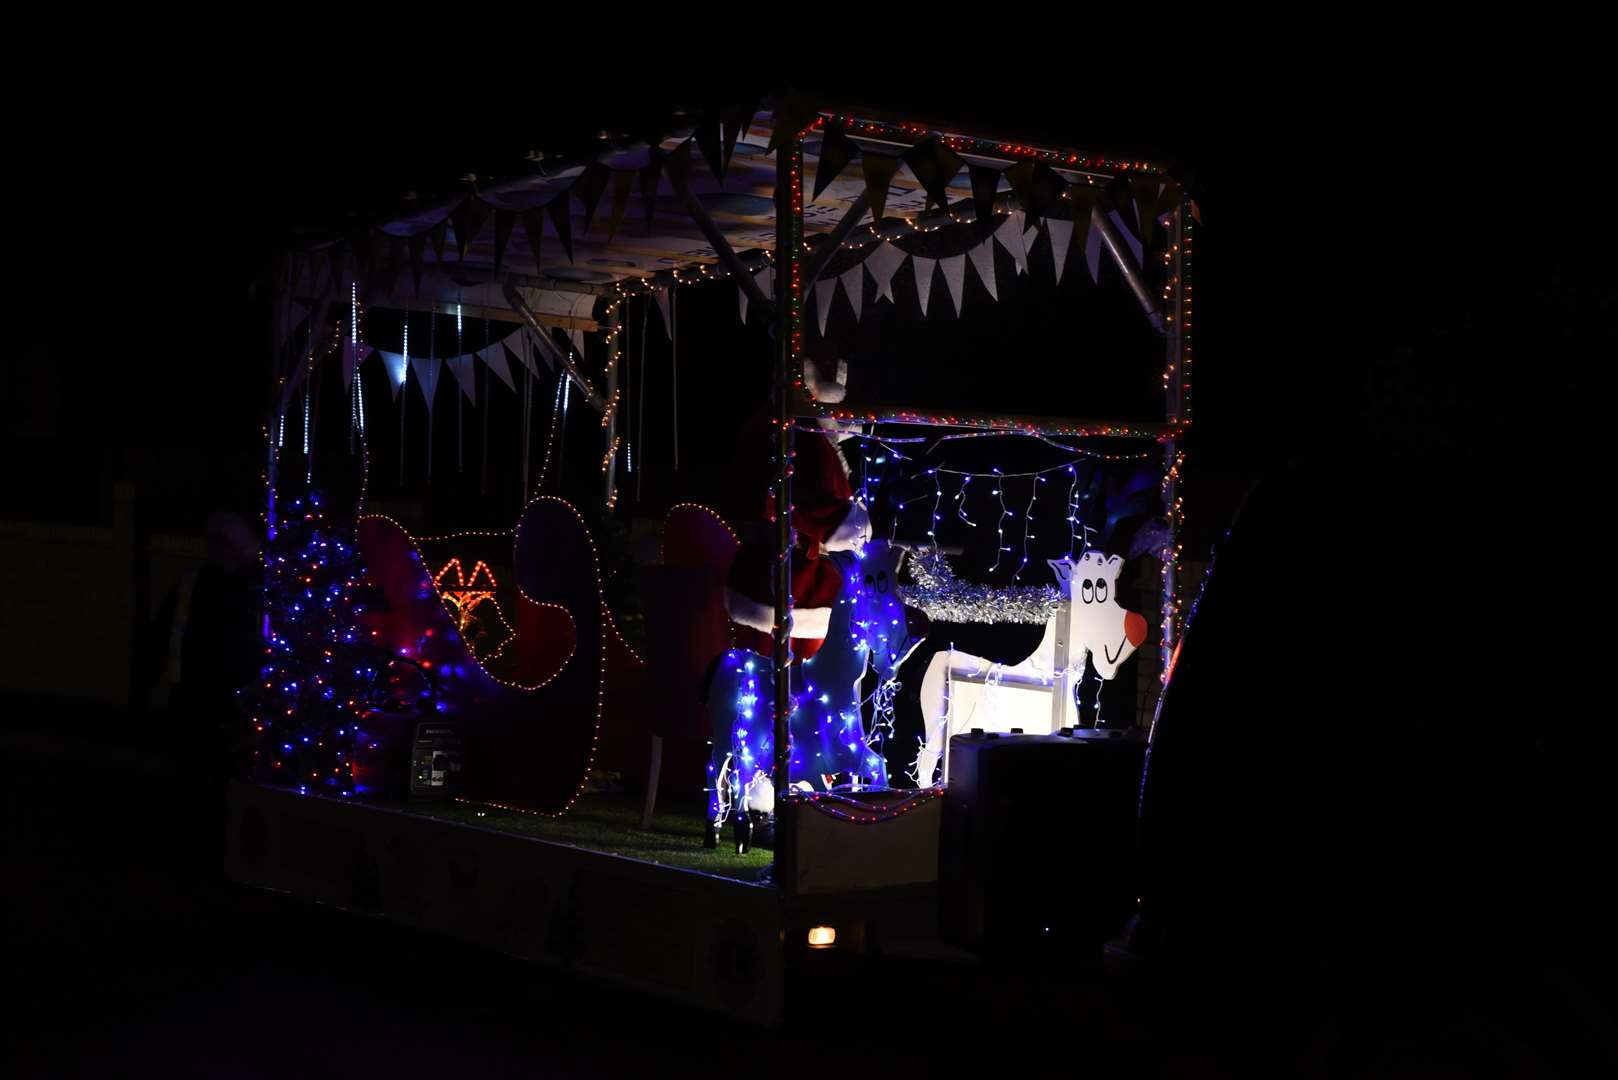 Santa's sleigh is lit up to bring festive cheer to any who see it. Picture: Ellie Crook